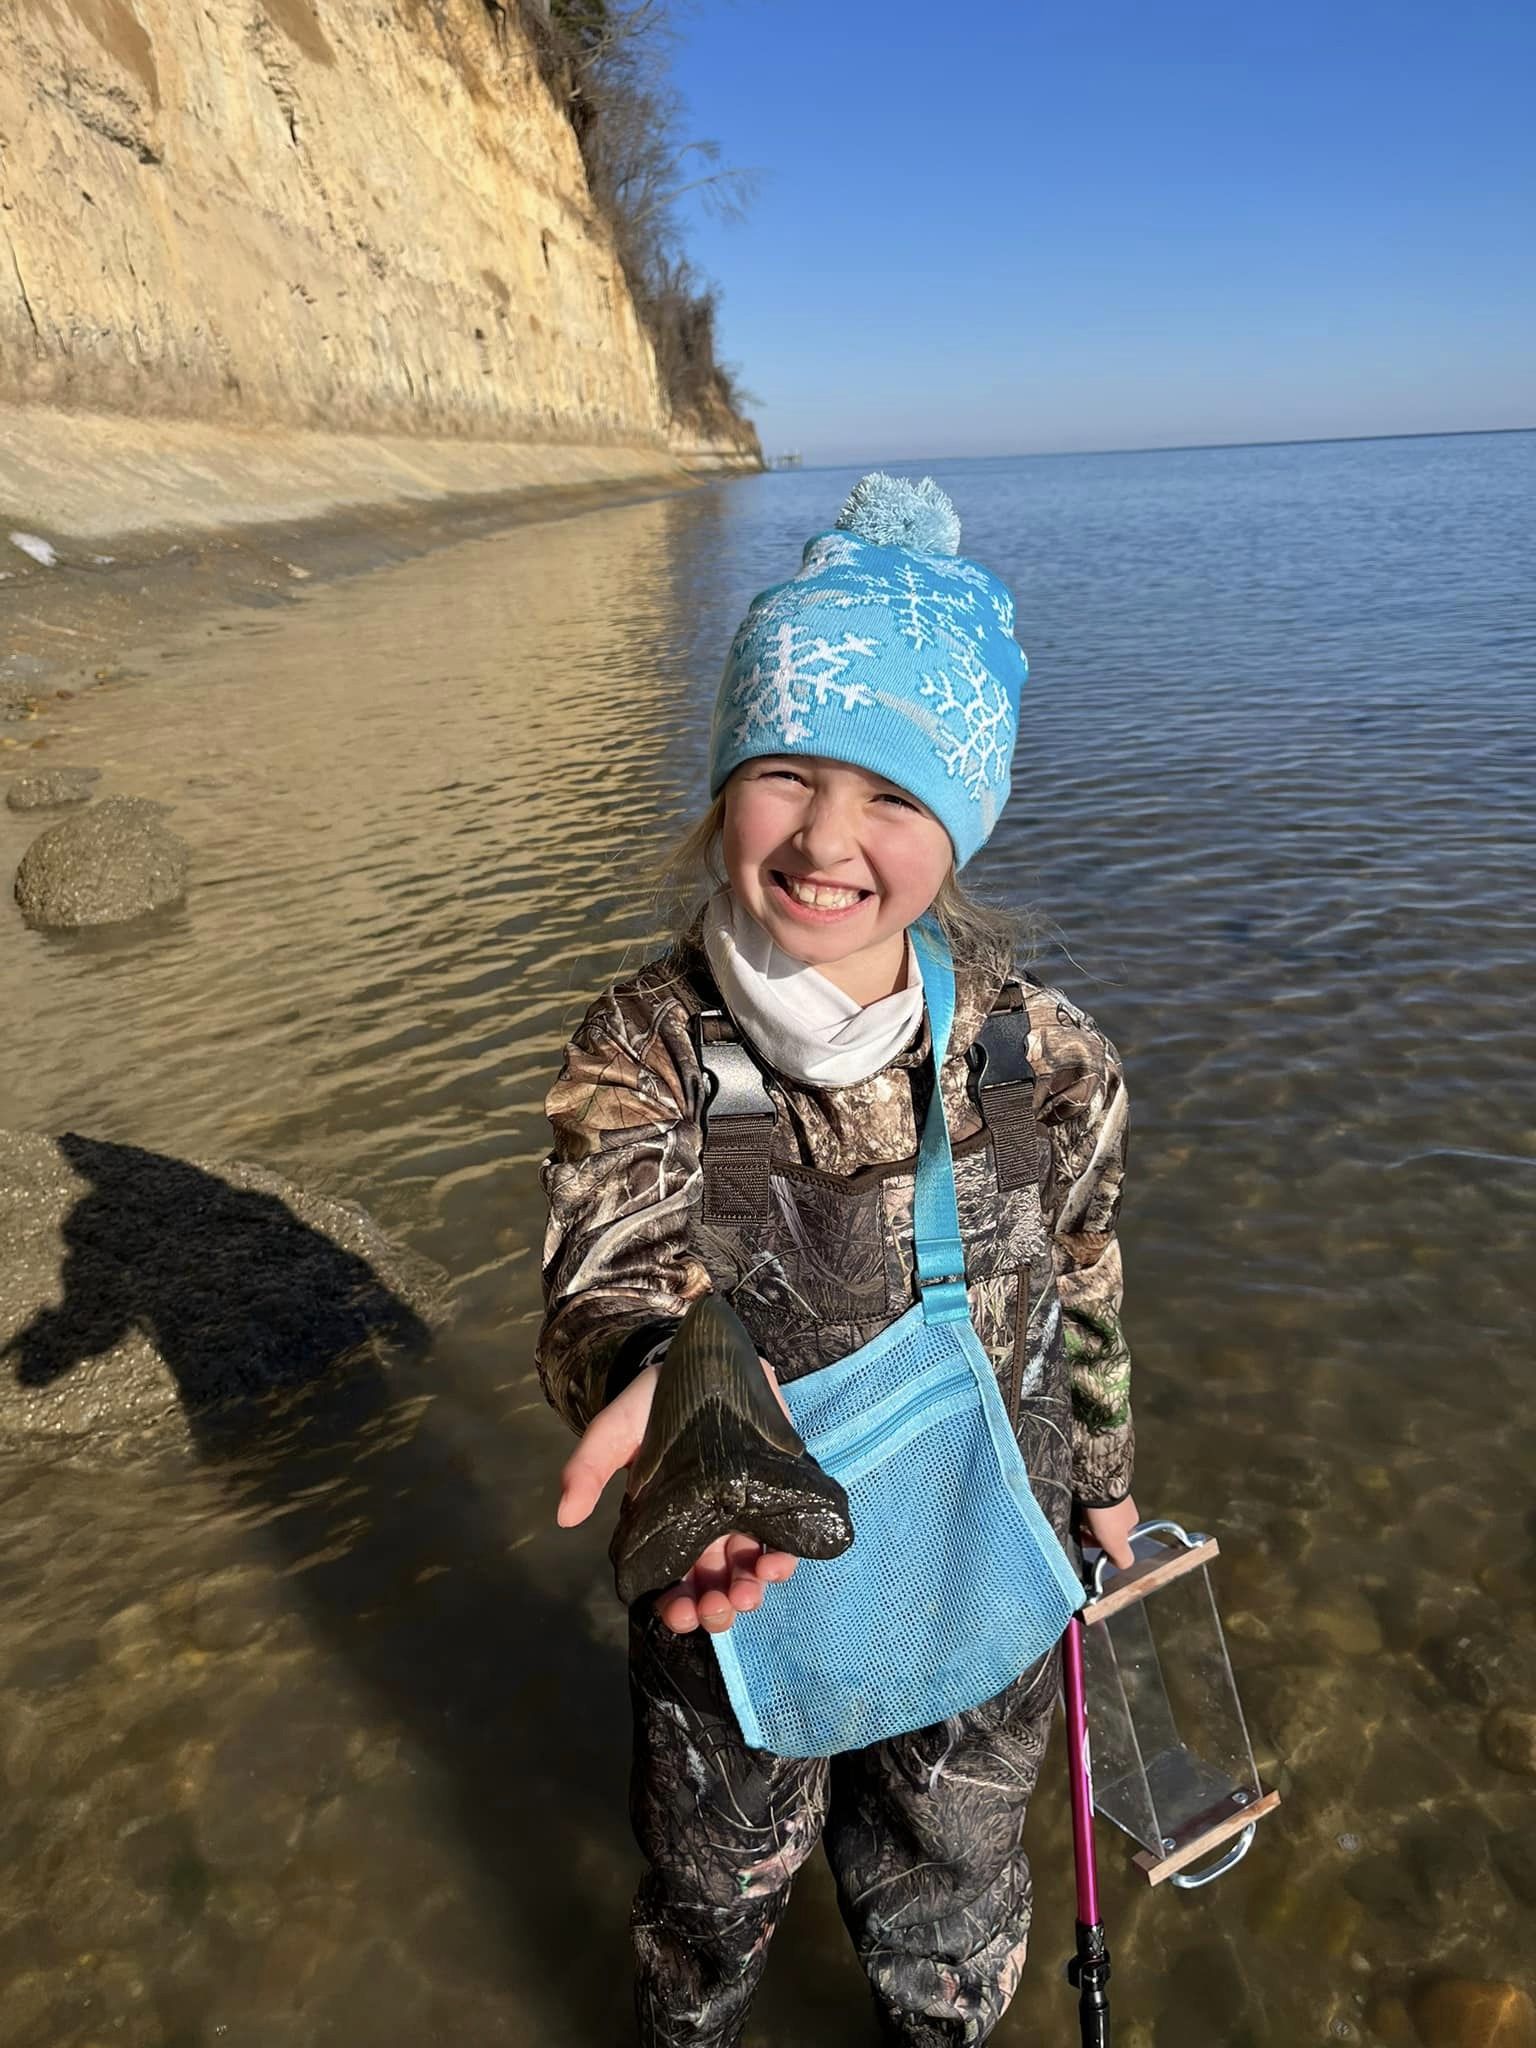 Molly Sampson, a 9-year-old girl, discovered a rare tooth from an Otodus megalodon shark. Image Credits: @Alicia Bruce Sampson/Facebook